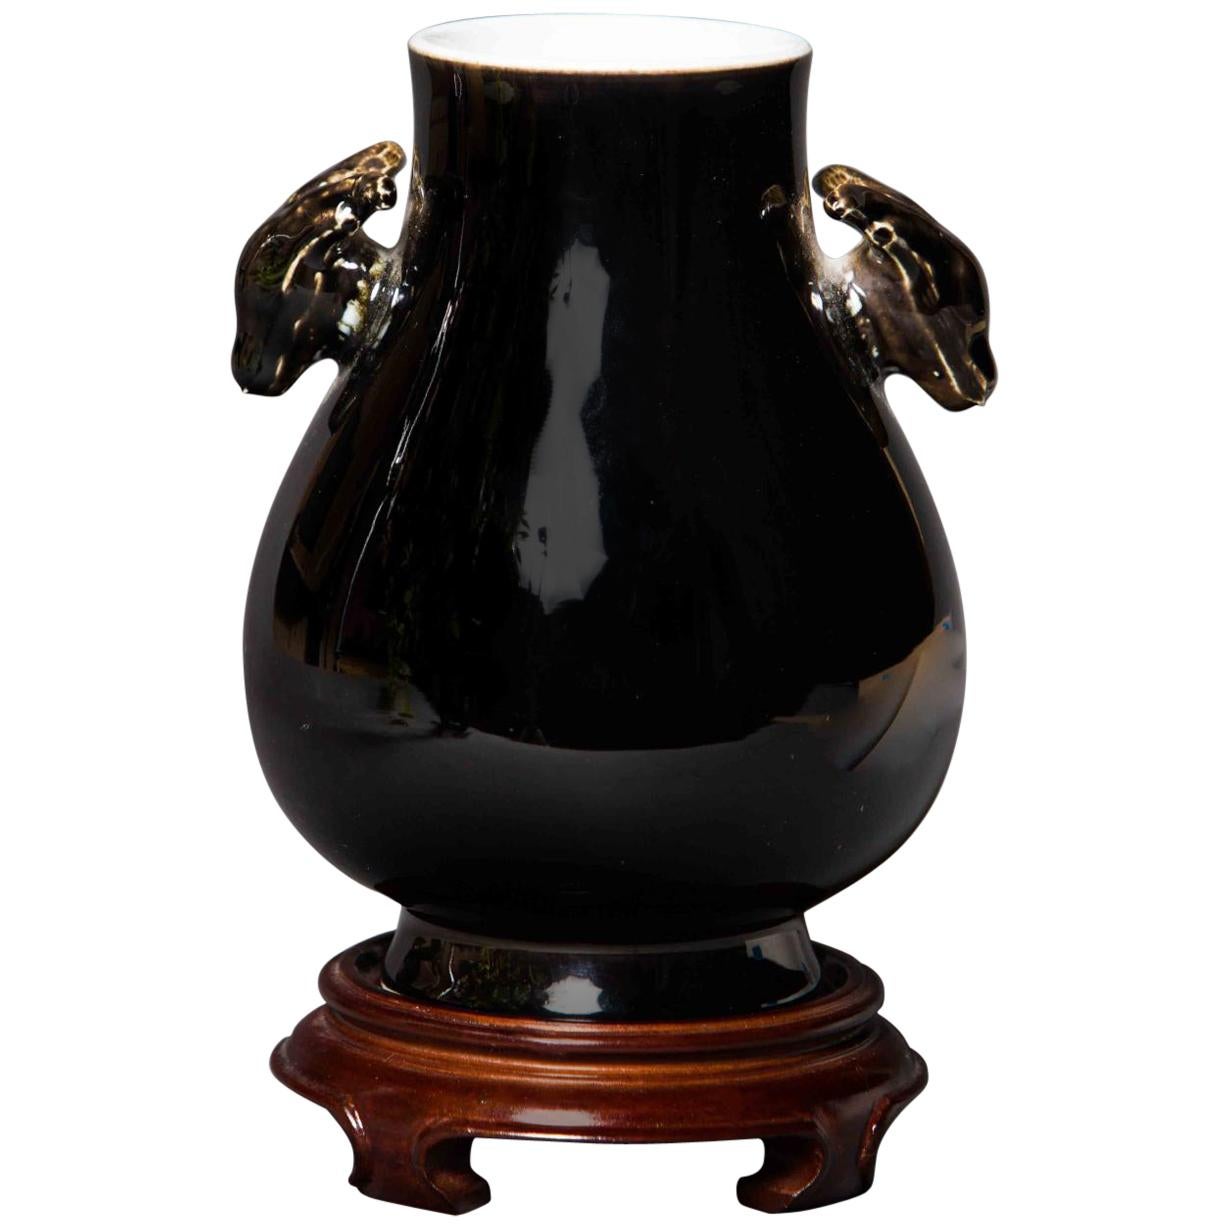 Mirror Black Glazed Vase with Deer Handles and Mark on Bottom, 1900 Chinese For Sale